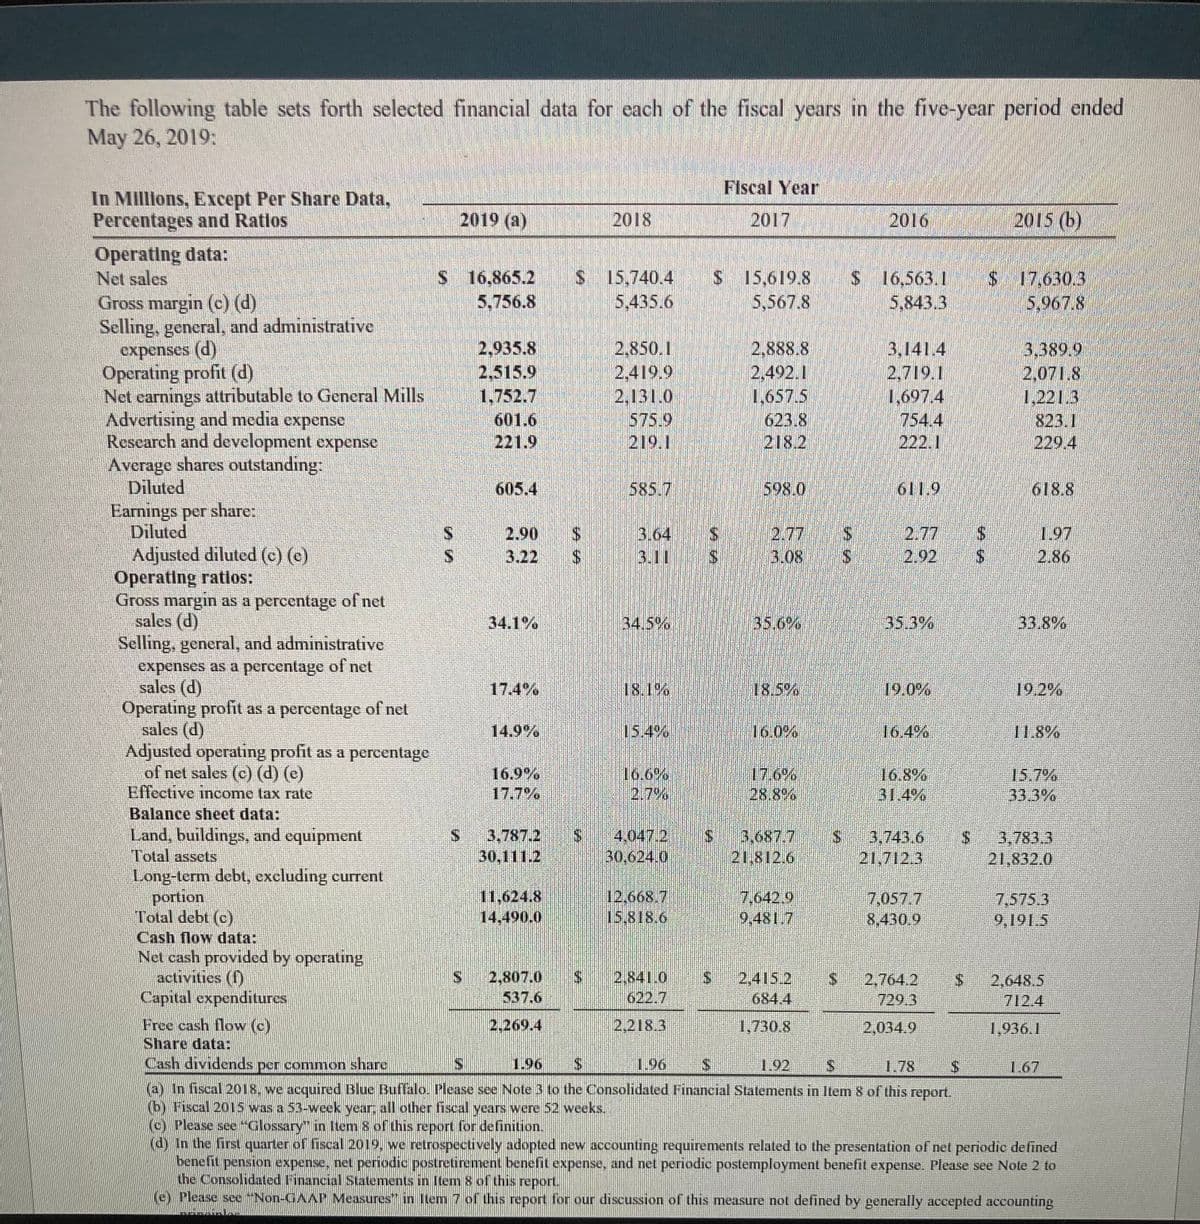 The following table sets forth selected financial data for each of the fiscal years in the five-year period ended
May 26, 2019:
Flscal Year
In MIlllons, Except Per Share Data,
Percentages and Ratlos
2019 (a)
2018
2017
2016
2015 (b)
Operating data:
Net sales
Gross margin (c) (d)
Selling, general, and administrative
expenses (d)
Operating profit (d)
Net earnings attributable to General Mills
Advertising and media expense
Research and development expense
Average shares outstanding:
Diluted
Earnings per share:
Diluted
Adjusted diluted (c) (c)
Operating ratlos:
Gross margin as a percentage of net
sales (d)
Selling, general, and administrative
expenses as a percentage of net
sales (d)
Operating profit as a percentage of net
sales (d)
Adjusted operating profit as a percentage
of net sales (c) (d) (e)
Effective income tax rate
S 16,865.2
5,756.8
S 15,740.4 S 15,619.8
5,435.6
S 16,563.1 $ 17,630.3
5,843.3
5,567.8
5,967.8
2,935.8
2,515.9
1,752.7
601.6
221.9
2,850.1
2,419.9
2,131.0
575.9
219.1
2,888.8
2,492.1
1,657.5
623.8
218.2
3,141.4
2,719.1
1,697.4
754.4
222.1
3,389.9
2,071.8
1,221.3
823.1
229.4
605.4
585.7
598.0
611.9
618.8
|S 2.77
3.64 S
3.11 S
1.97
2.86
2.90
2.77
3.22
3.08 S 2.92
34.1%
34.5%
35.6%
35.3%
33.8%
17.4%
18.1%
18.5%
19.0%
19.2%
14.9%
15.4%
16.0%
16.4%
11.8%
16.9%
17.7%
16.6%
2.7%
17.6%
28.8%
16.8%
31.4%
15.7%
33.3%
Balance sheet data:
Land, buildings, and equipment
Total assets
Long-term debt, excluding current
portion
Total debt (c)
3,787.2
30,111.2
4,047.2
30,624.0
3,687.7
21,812.6
3.743.6
21,712.3
3,783.3
21,832.0
11,624.8
14,490.0
12,668.7
15,818.6
7.642.9
9,481.7
7,057.7
8,430.9
7,575.3
9,191.5
Cash flow data:
Net cash provided by operating
activities (f)
Capital expenditures
2,807.0
537.6
2,841.0
622.7
2,415.2
684.4
S.
2,764.2
729.3
2,648.5
712.4
Free cash flow (c)
Share data:
Cash dividends per common share
2,269.4
2,218.3
1,730.8
2,034.9
1,936.1
1.96
1.96
S 1.92
1.78
1.67
(a) In fiscal 2018, we acquired Blue Buffalo. Please see Note 3 to the Consolidated Financial Statements in Item 8 of this report.
(b) Fiscal 2015 was a 53-week year; all other fiscal years were 52 weeks.
(c) Please see "Glossary" in Item 8 of this report for definition.
(d) In the first quarter of fiscal 2019, we retrospectively adopted new accounting requirements related to the presentation of net periodic defined
benefit pension expense, net periodic postretirement benefit expense, and net periodic postemployment benefit expense. Please see Note 2 to
the Consolidated Financial Statements in Item 8 of this report.
(e) Please see "Non-GAAP Measures" in Item 7 of this report for our discussion of this measure not defined by generally accepted accounting
%24
%24
